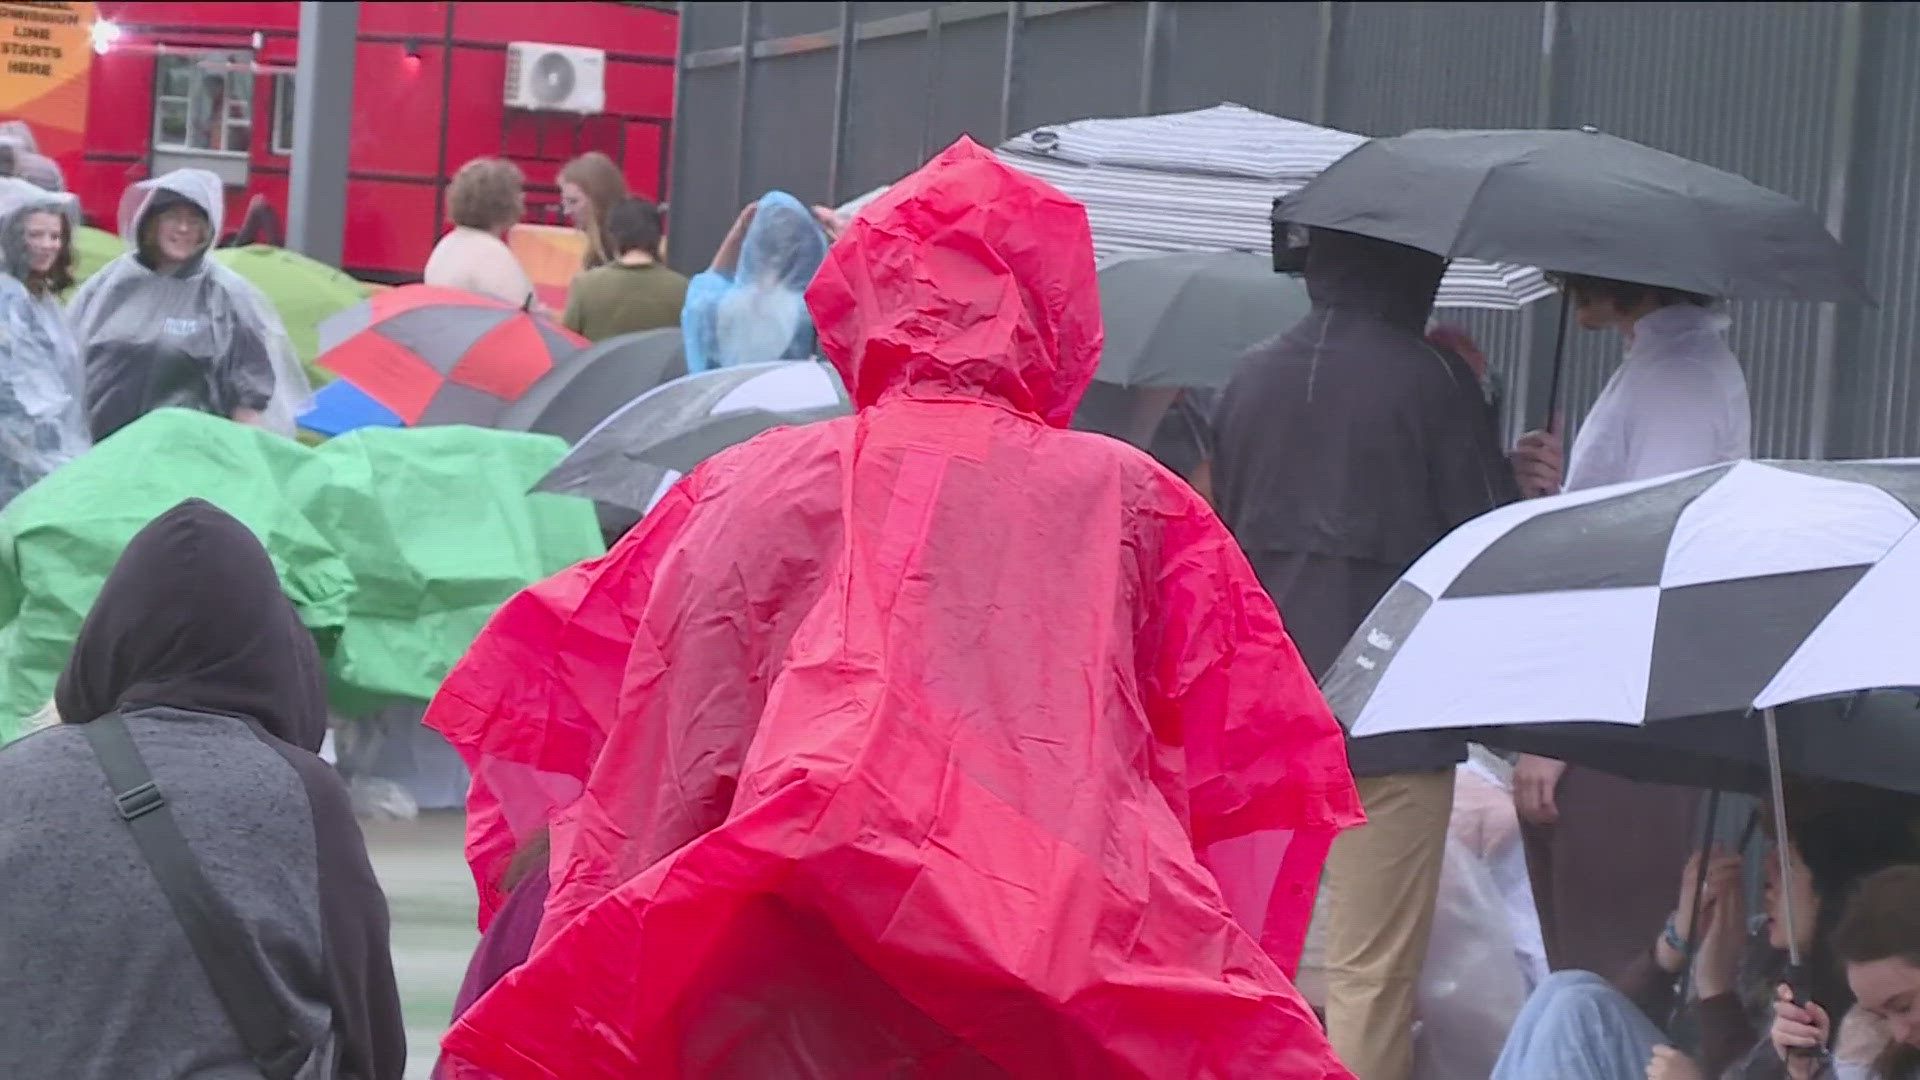 LUCKILY TONIGHT'S SHOW WASN'T RAINED OUT, BUT SEVERE WEATHER SEASON CAN MAKE SOME CONCERT PLANS UNPREDICTABLE...